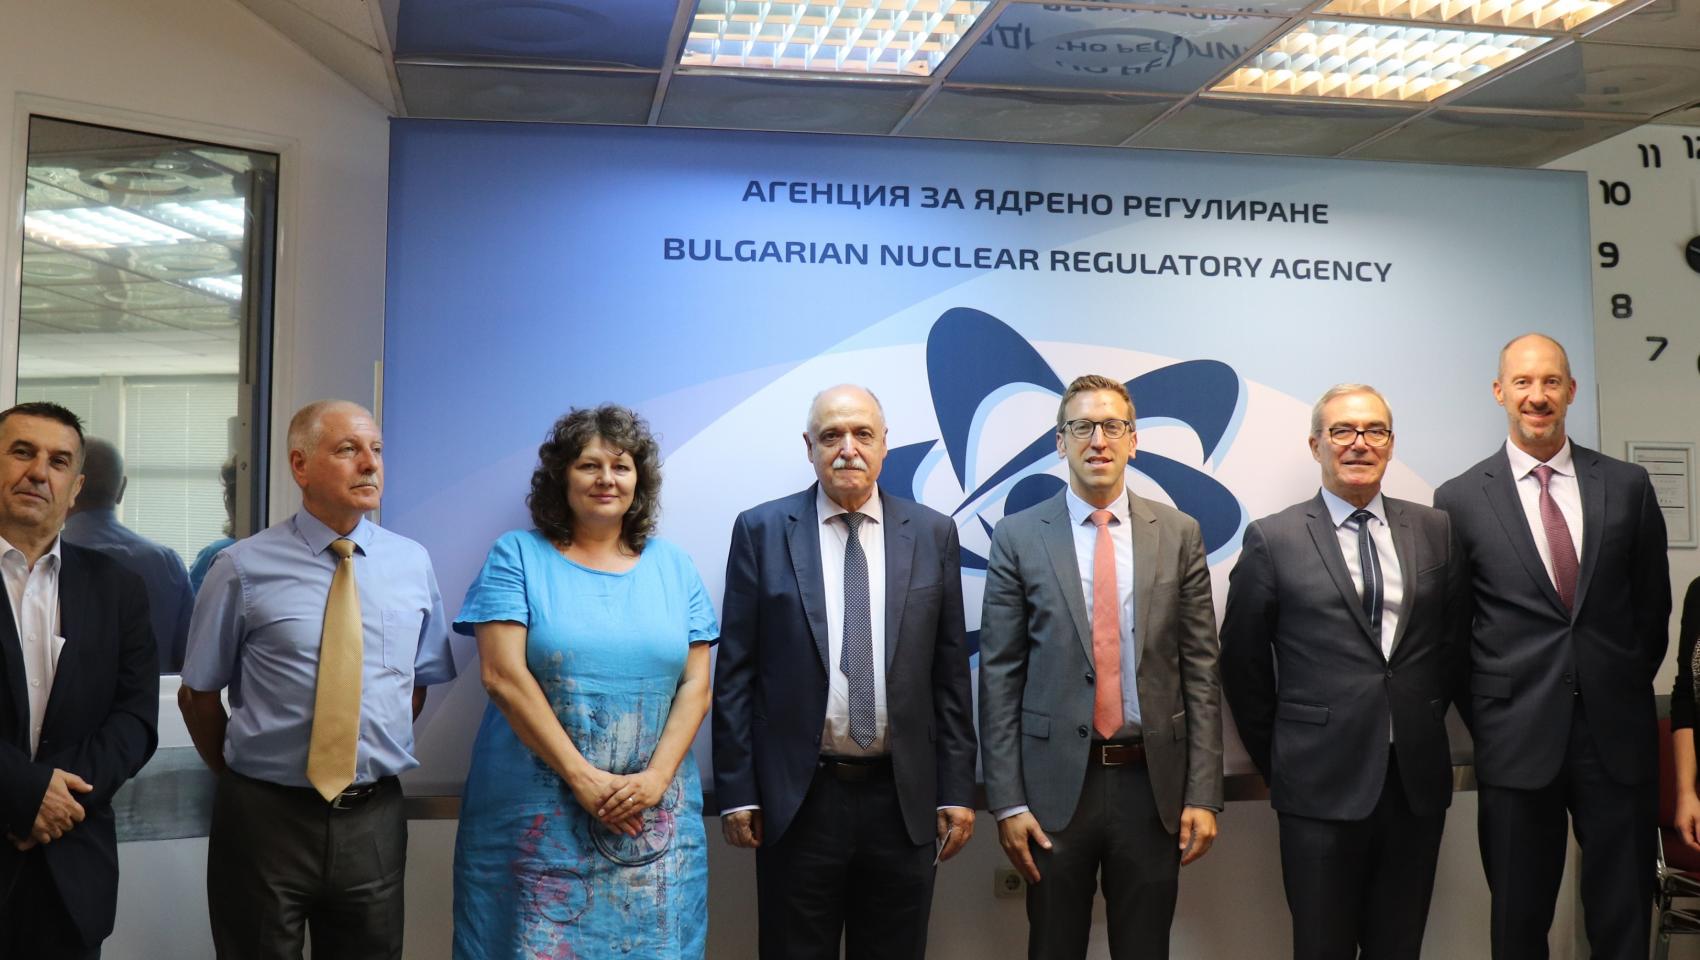 The leadership of the Nuclear Regulatory Agency (NRA) held a